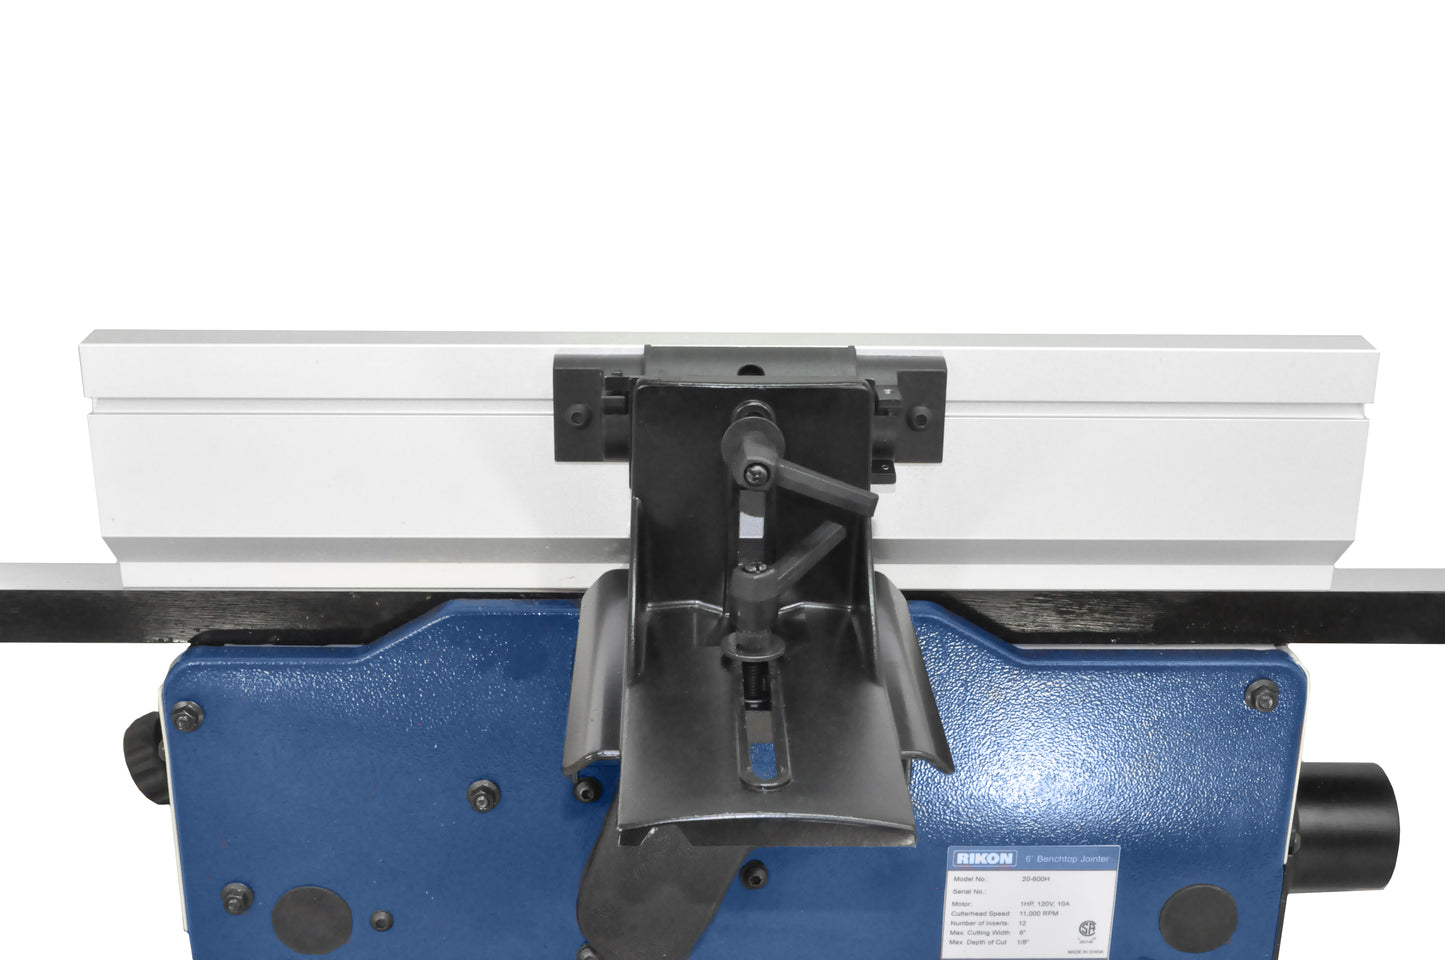 Rikon 20-600H 6″ Helical-style Benchtop Jointer